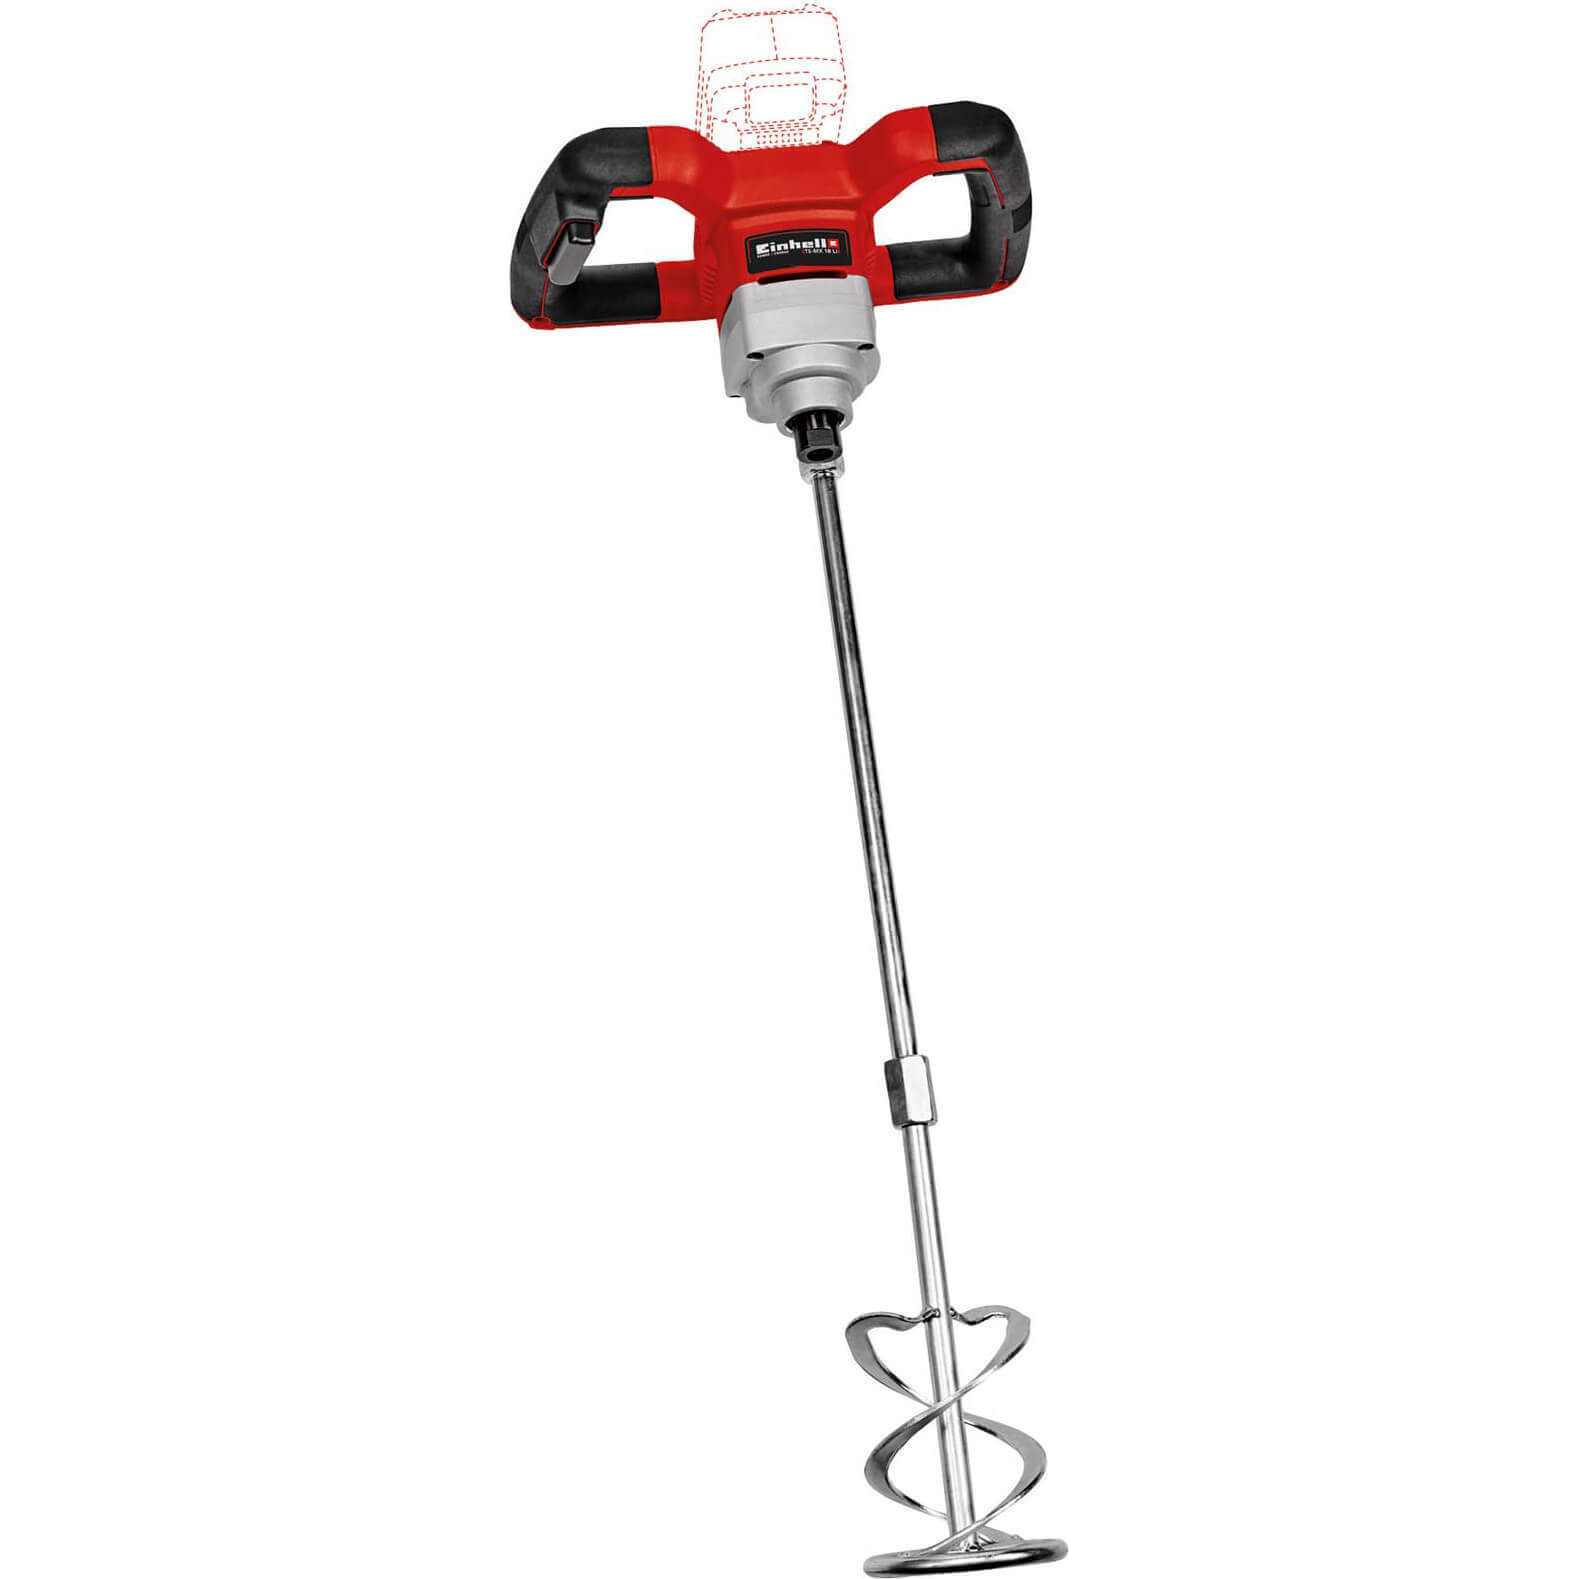 Image of Einhell TE-MX 18 Li 18v Cordless Paint and Plaster Mixer No Batteries No Charger No Case